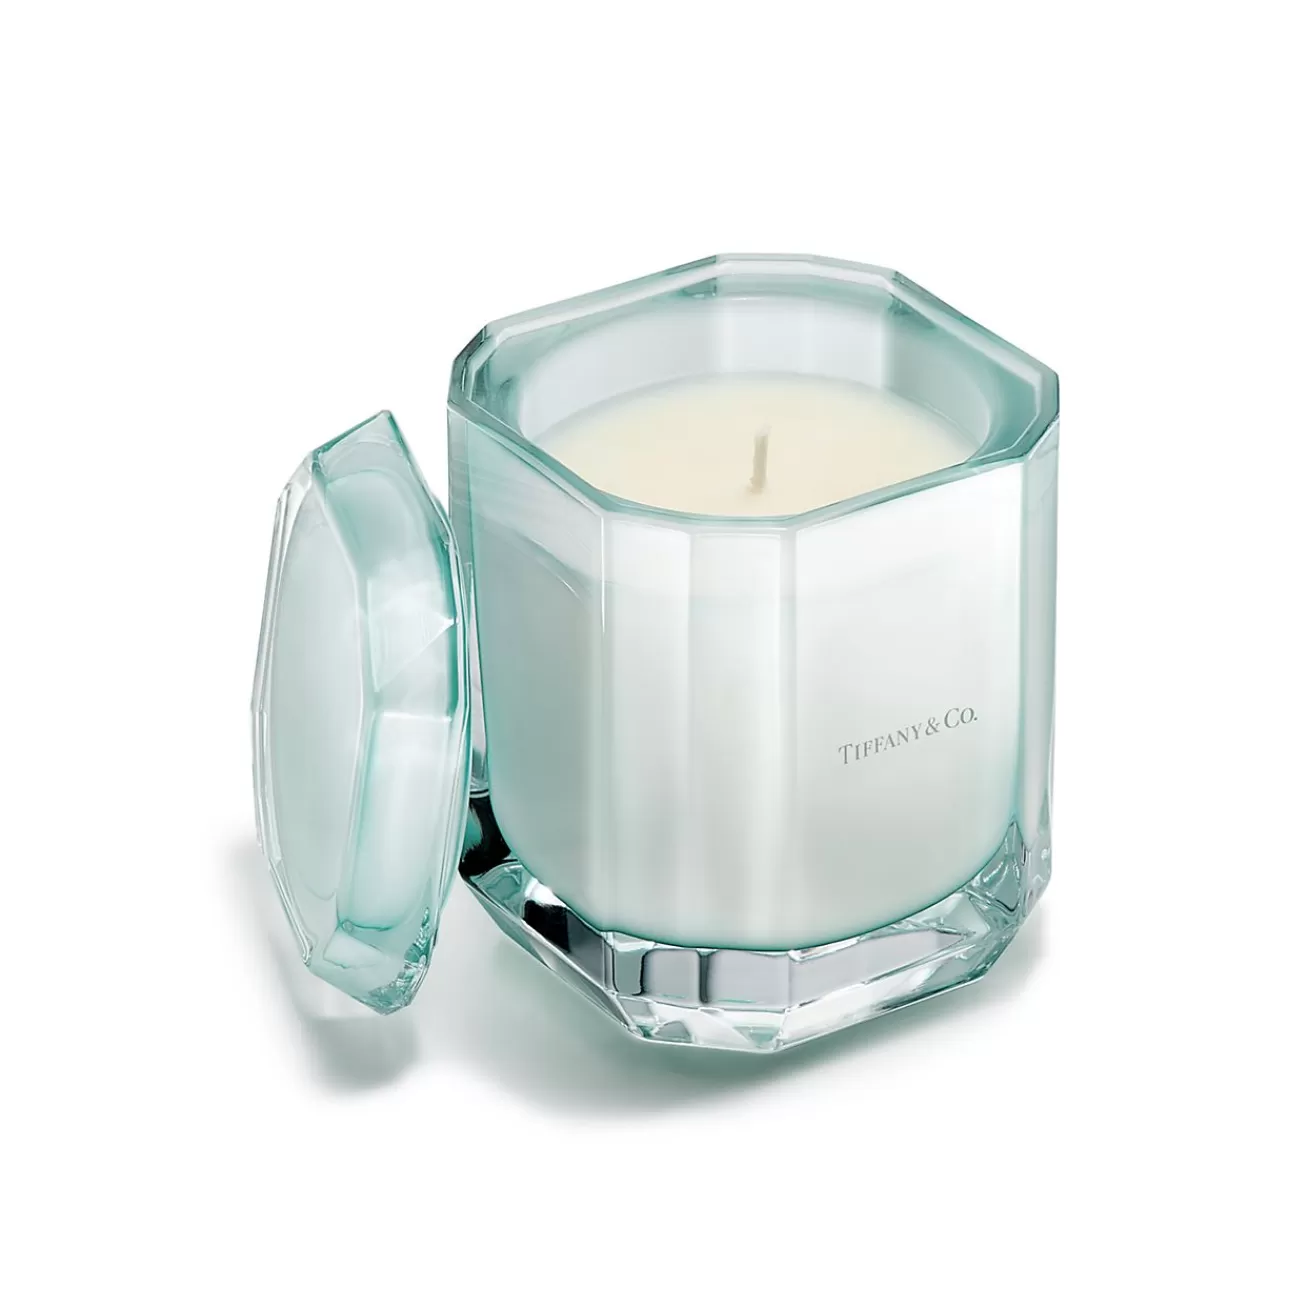 Tiffany & Co. Tiffany Facets 1837 Candle in Sapphire-colored Glass | ^ The Home | Housewarming Gifts